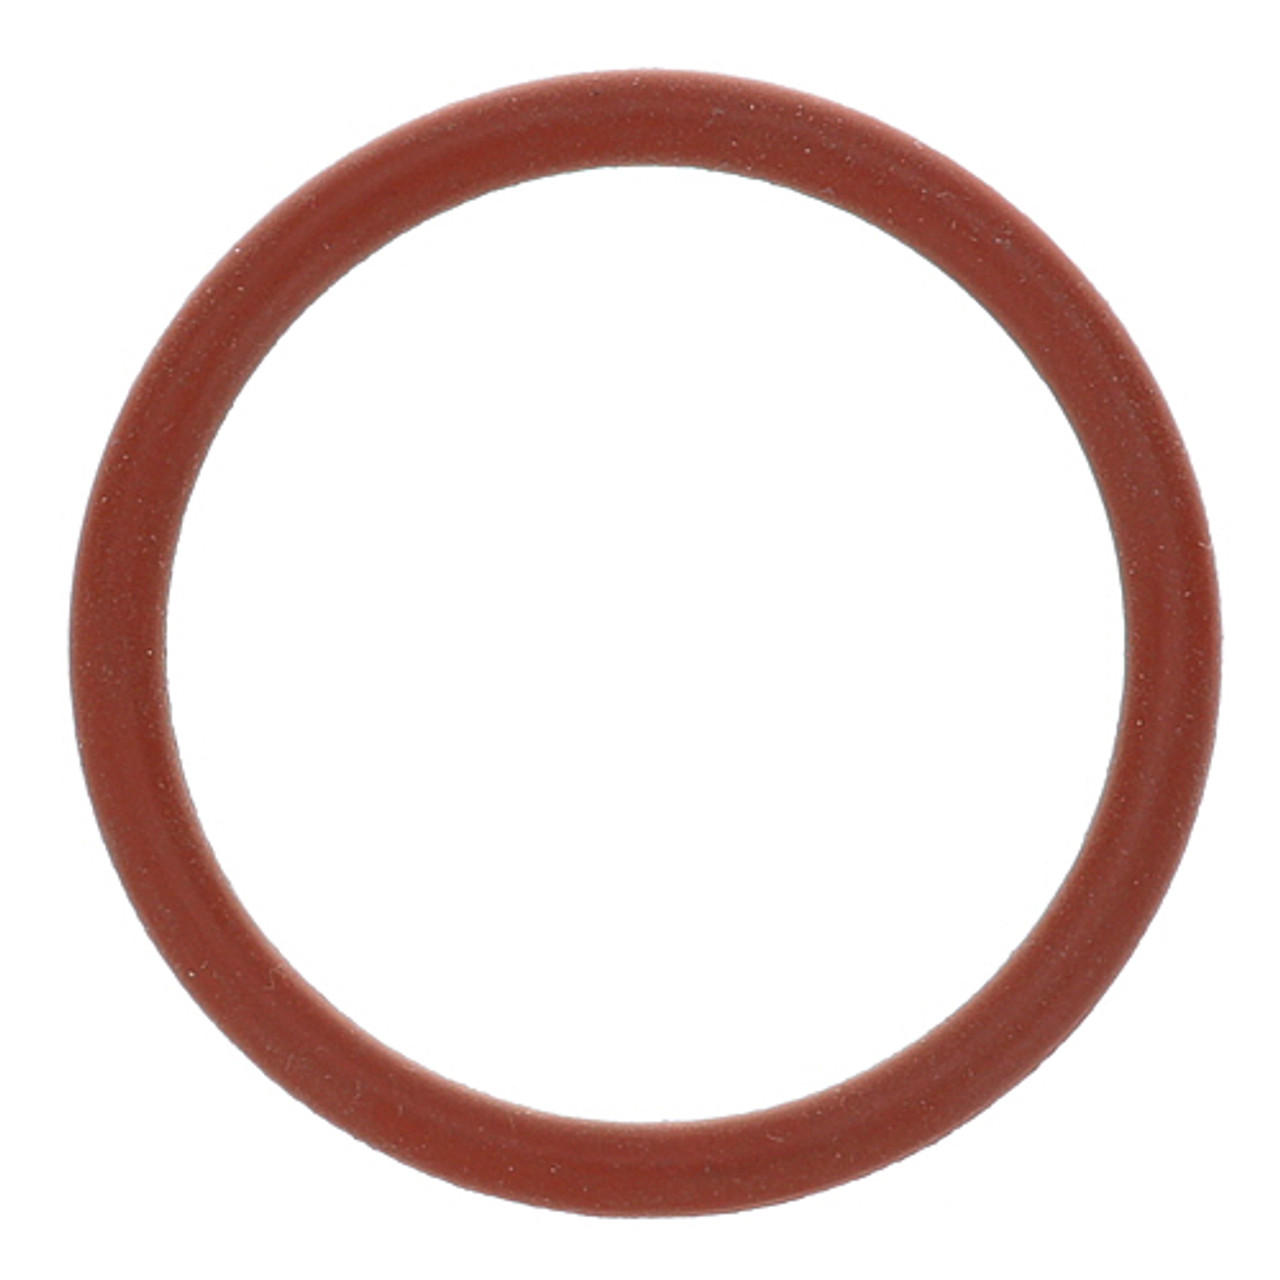 O-Ring 1-3/8" Id X 1/8" Width - Replacement Part For Frymaster 8160597PK (6)